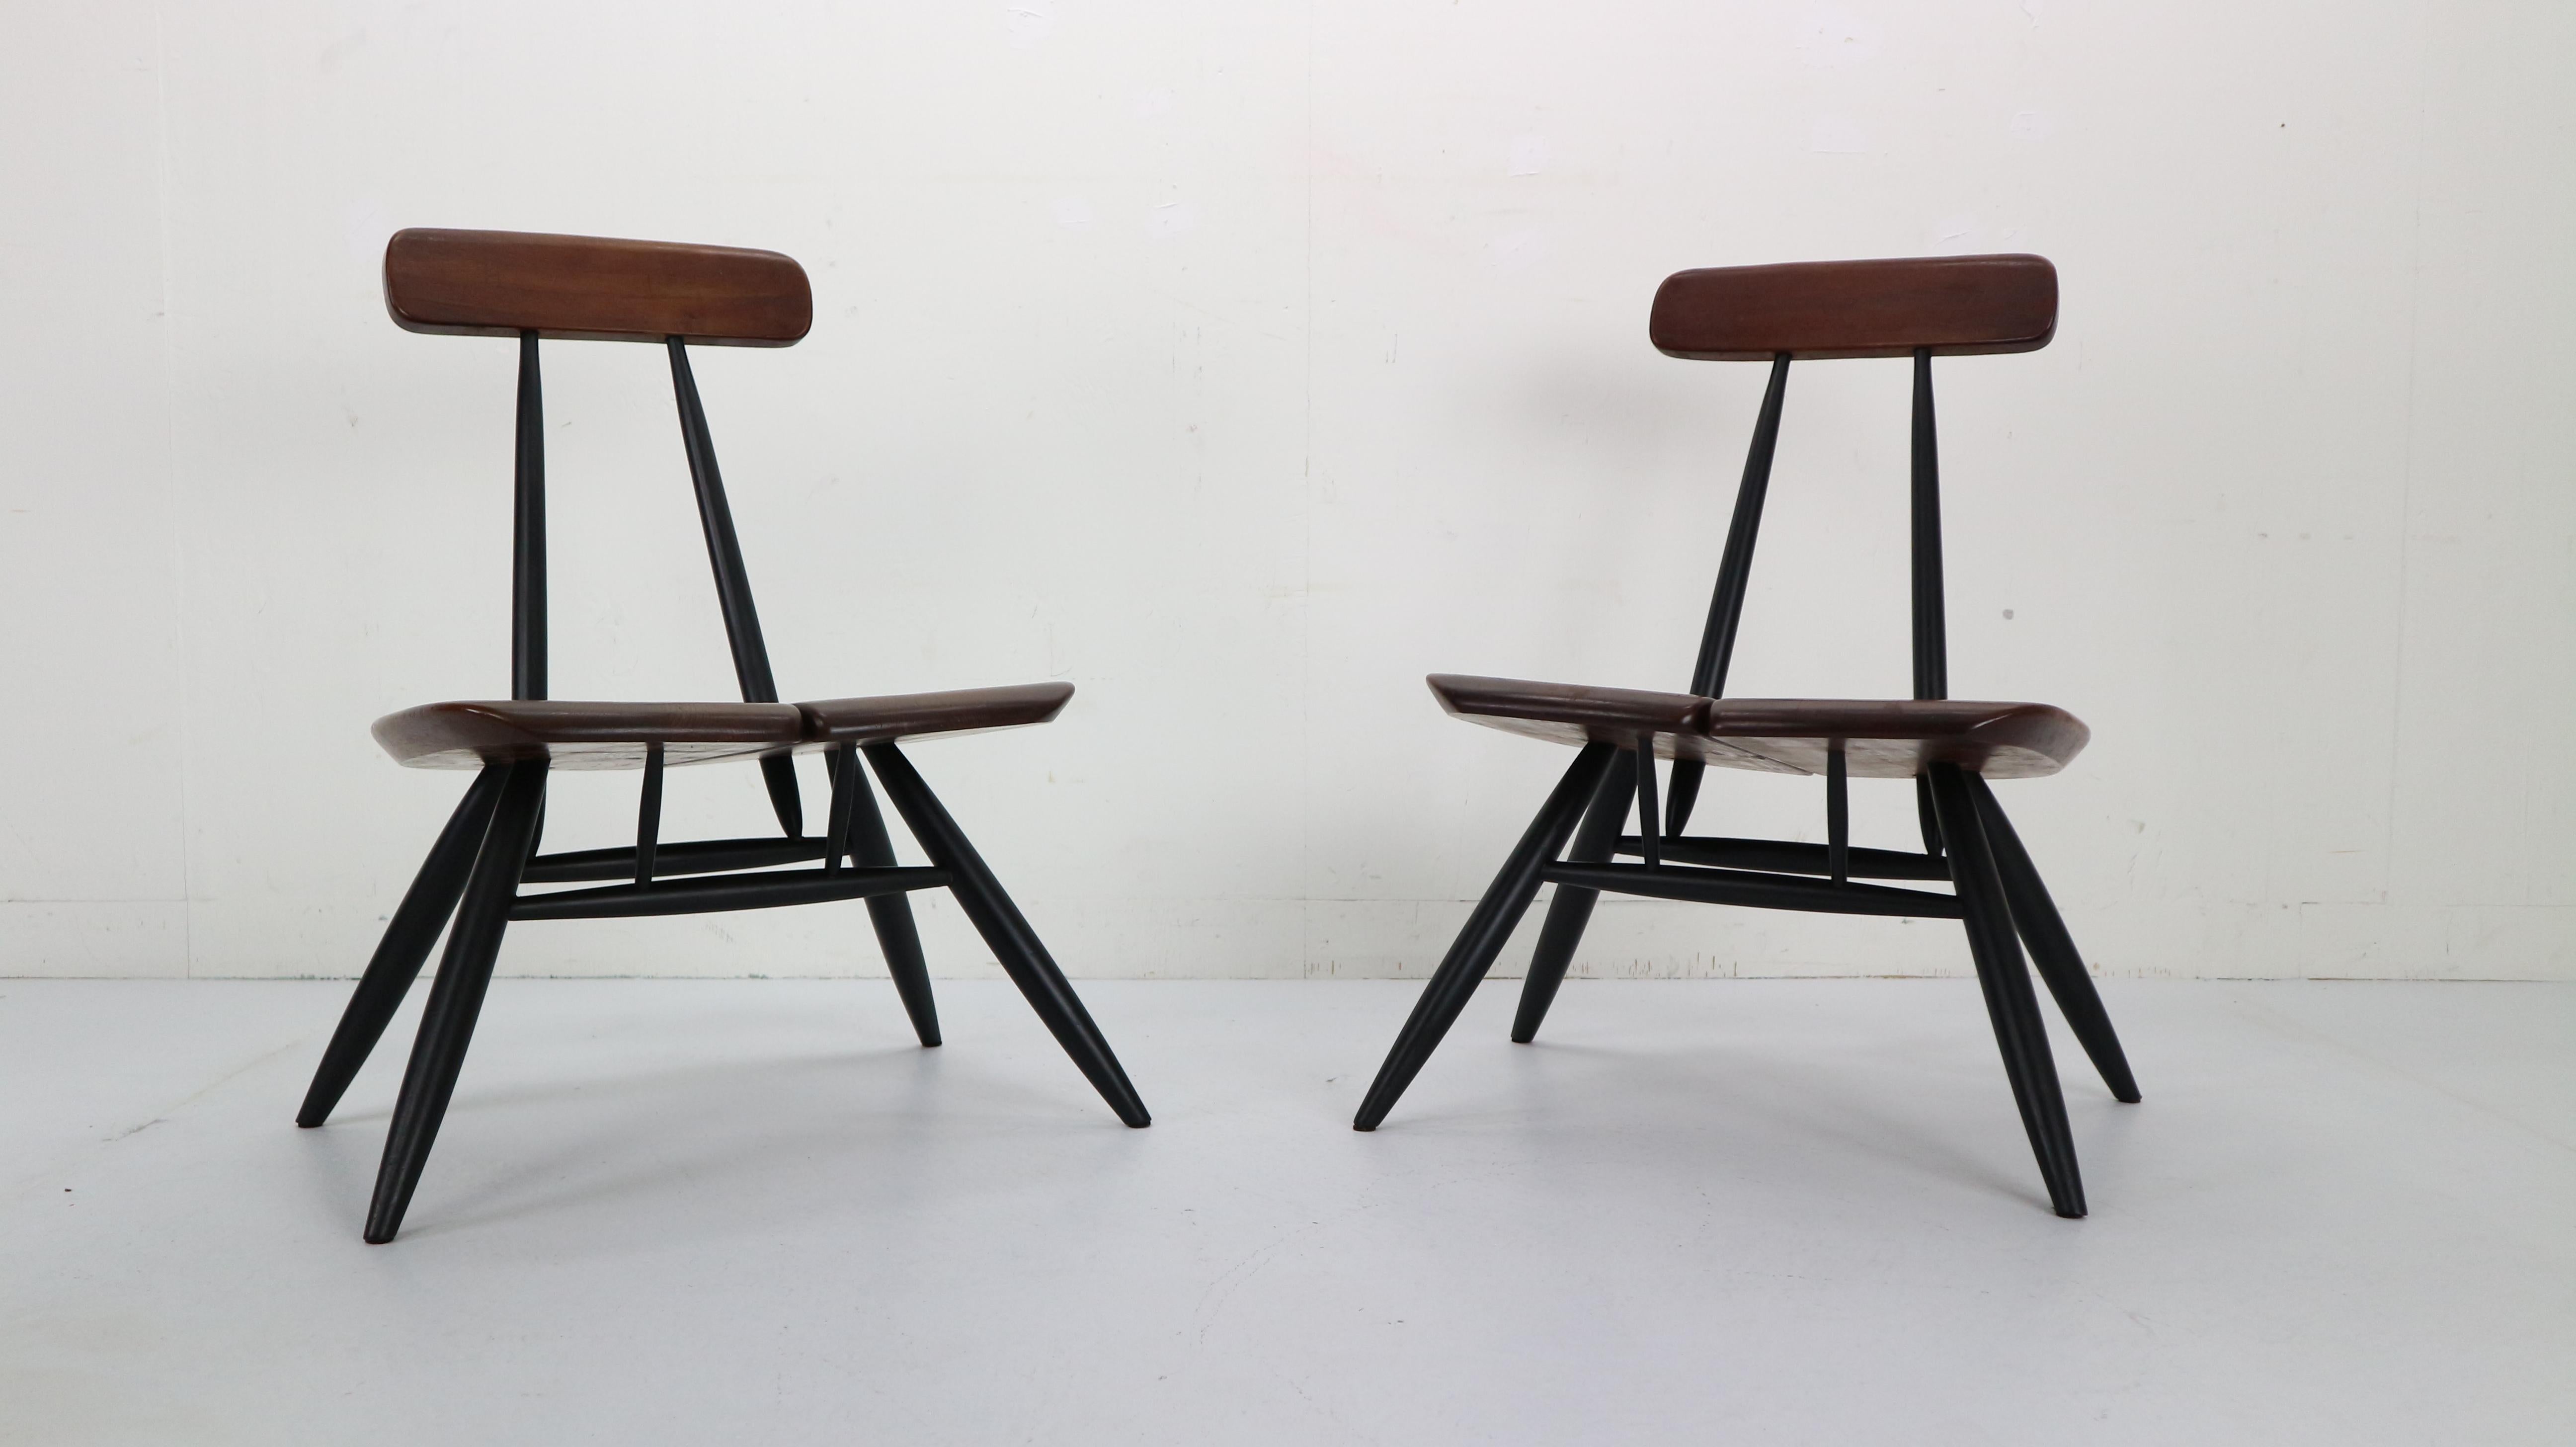 Rare Pirkka lounge chair pair designed by Ilmari Tapiovaara and manufactured by Laukaan Puu, Finland 1955.
This pair of lounge chairs from the Pirkka series is quite rare and it’s the only model that was not put back in production.
The chairs have a